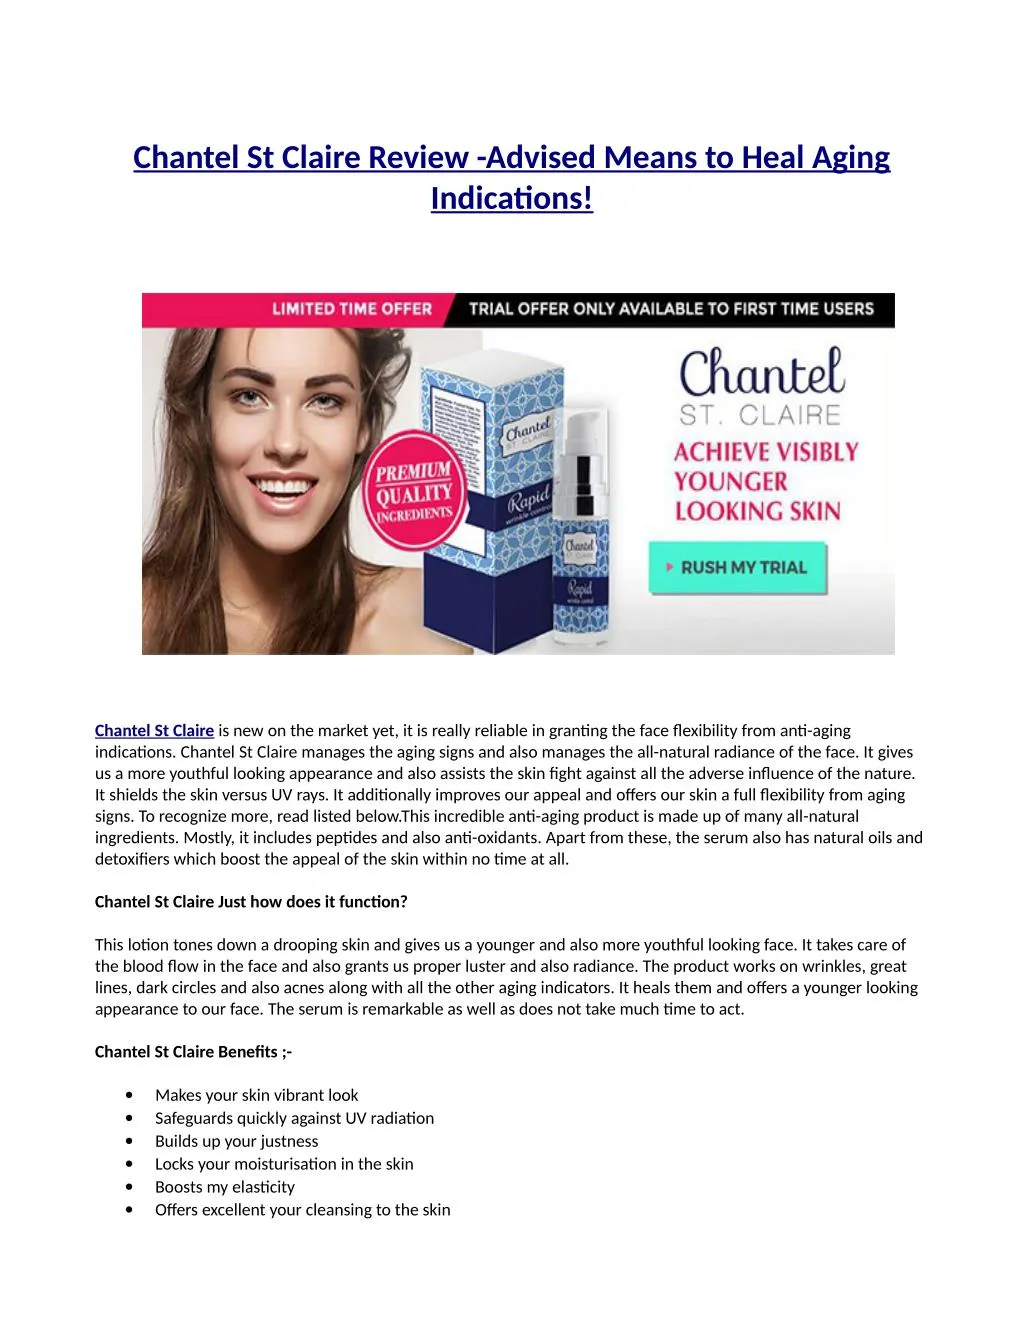 chantel st claire review advised means to heal